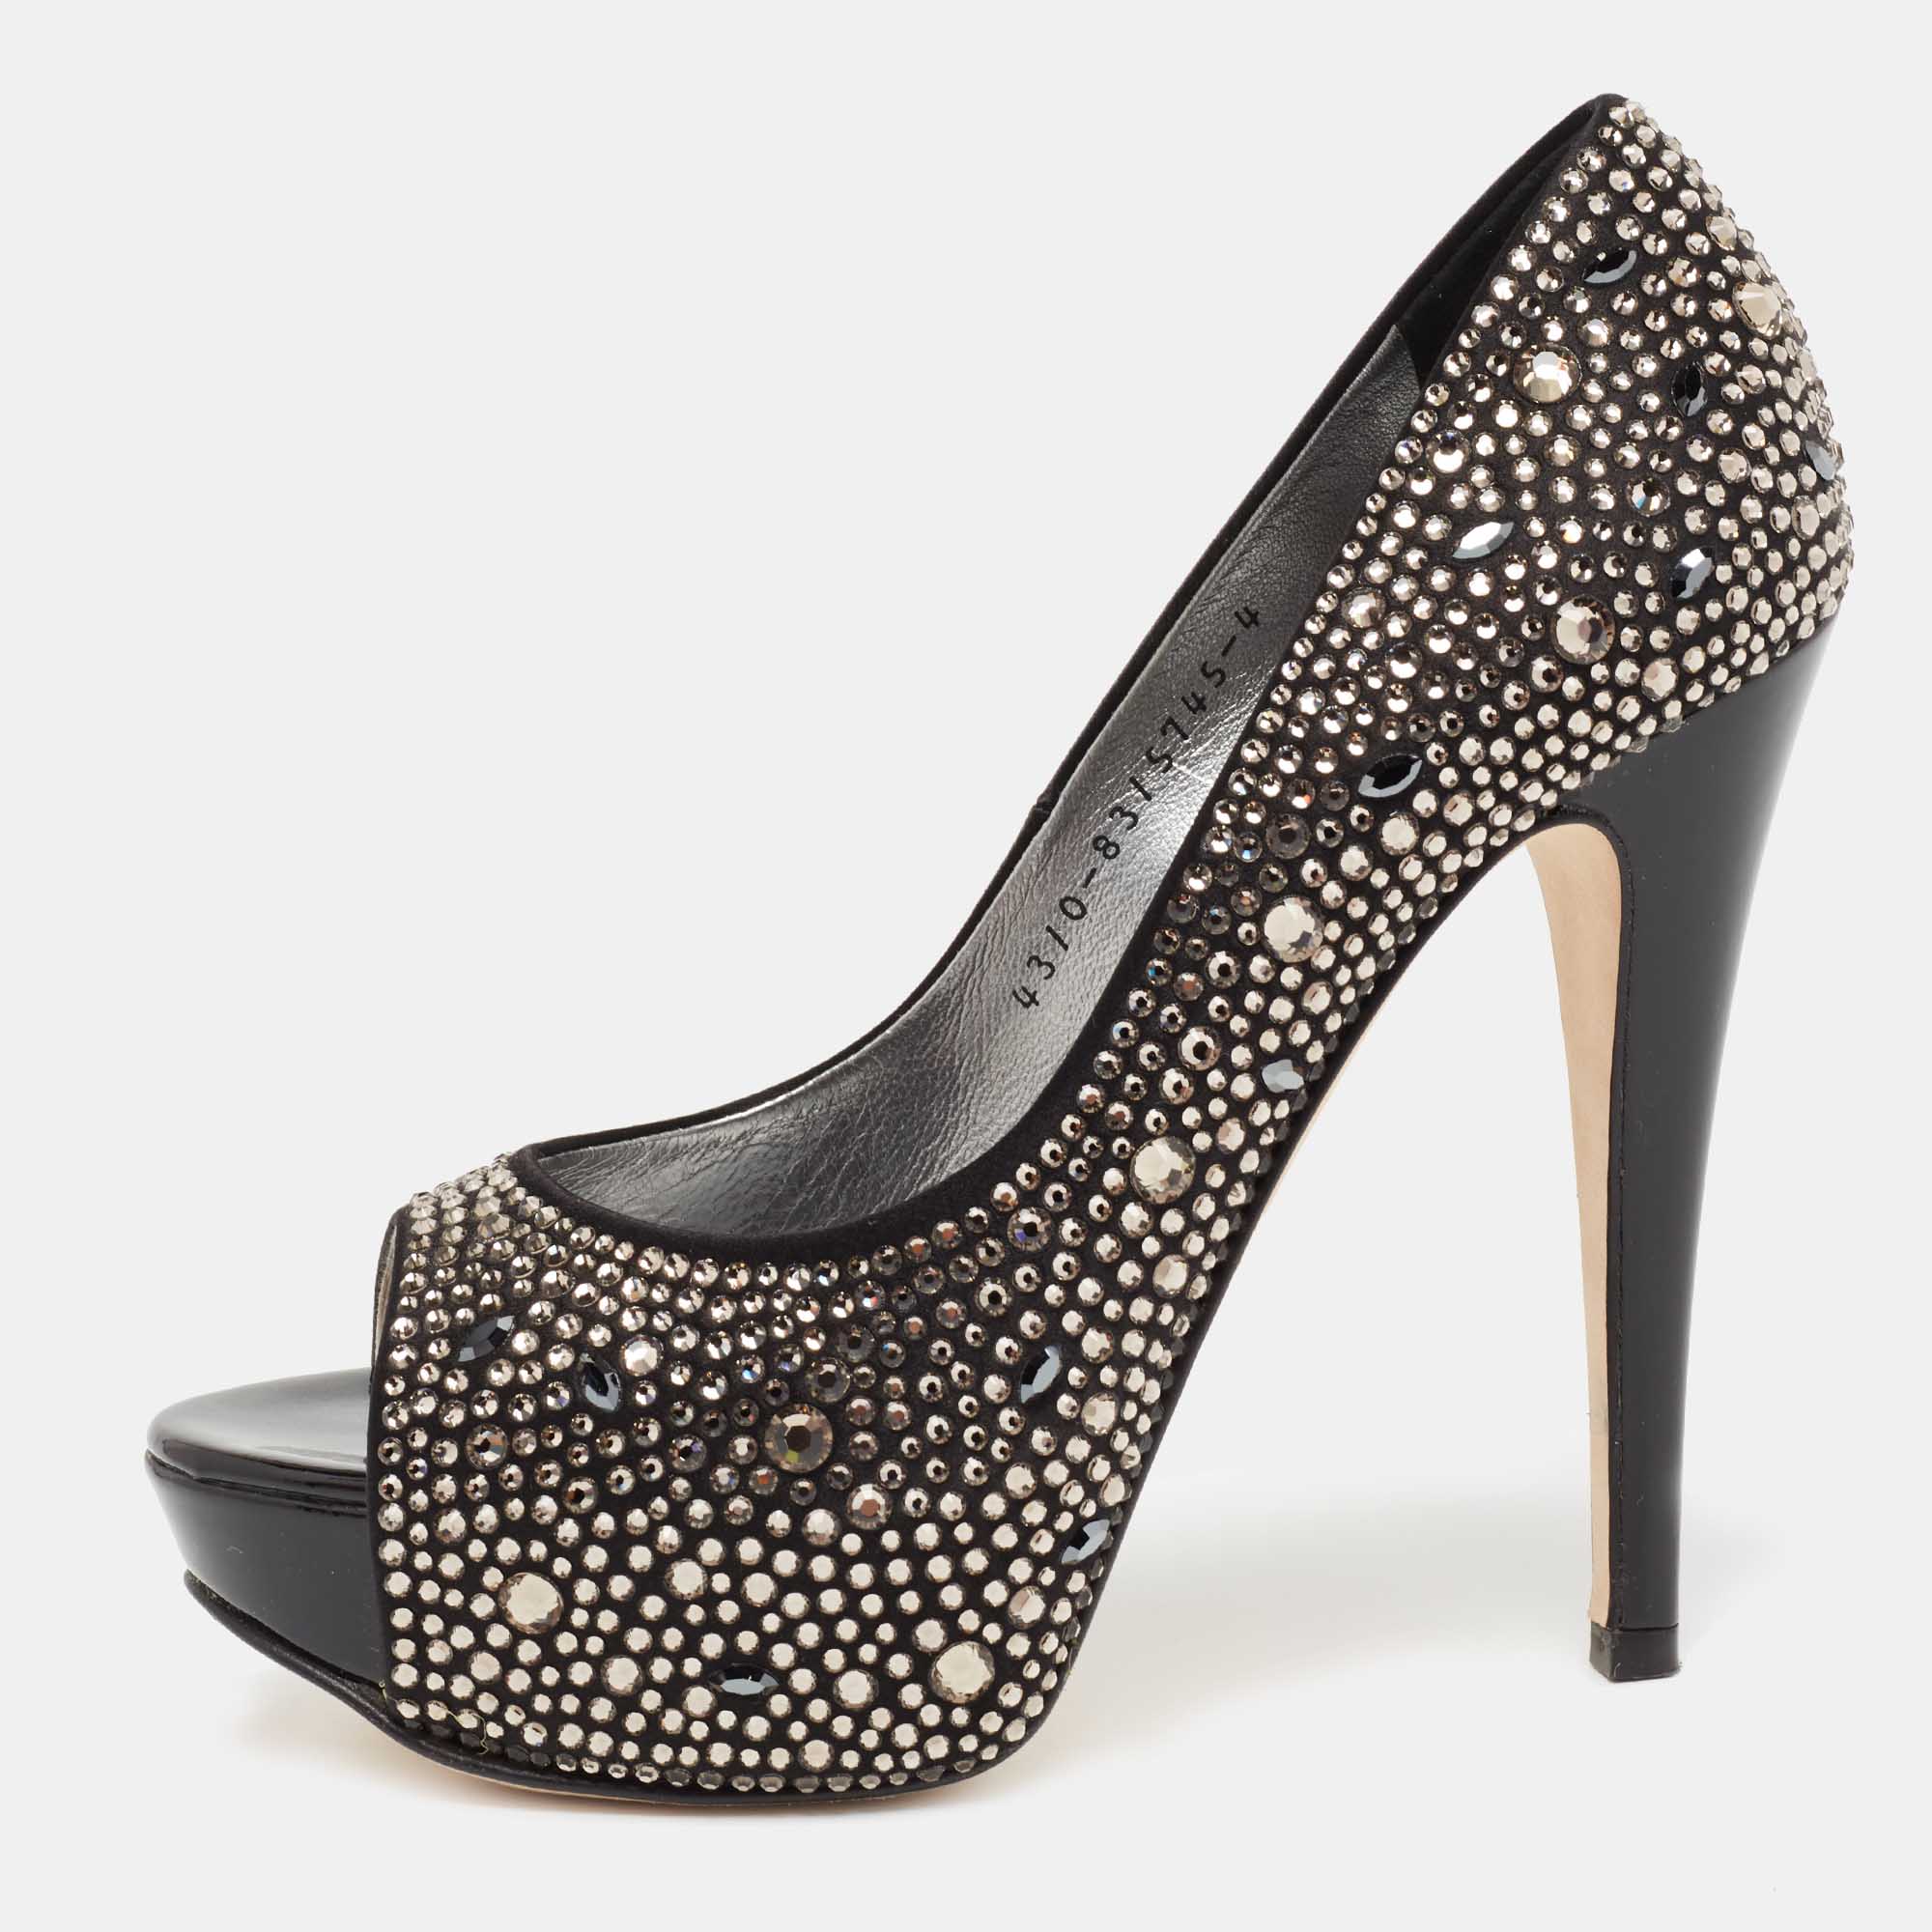 Take every step with elegance and style in these pumps from the House of Gina. They are crafted meticulously using black satin which is highlighted with crystal embellishments. They showcase platforms peep toes and tall heels. These pumps will be your favorite pair in no time